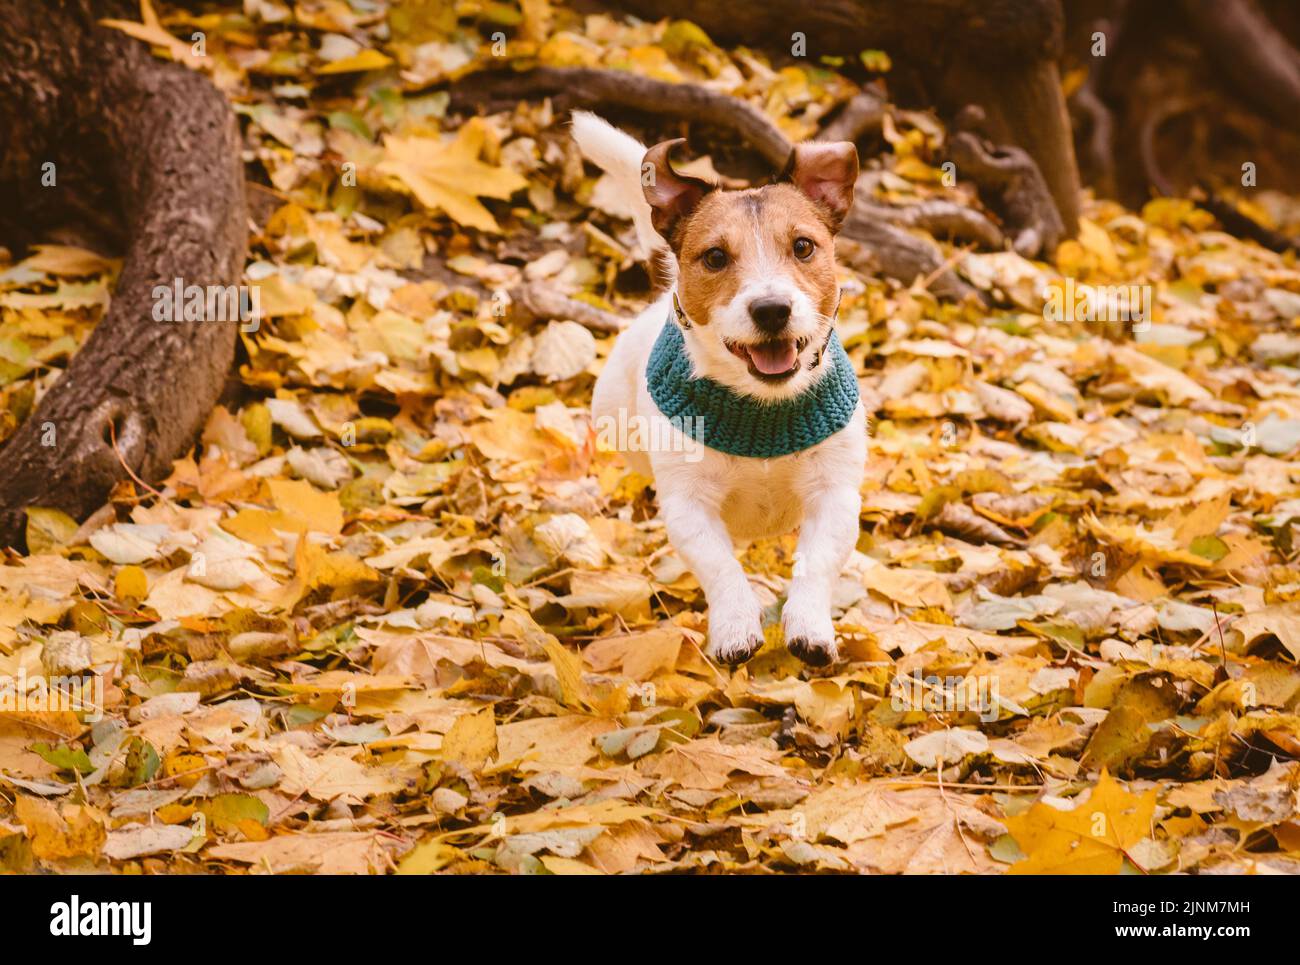 Happy dog running and jumping while playing at Autumn park on fallen yellow leaves Stock Photo